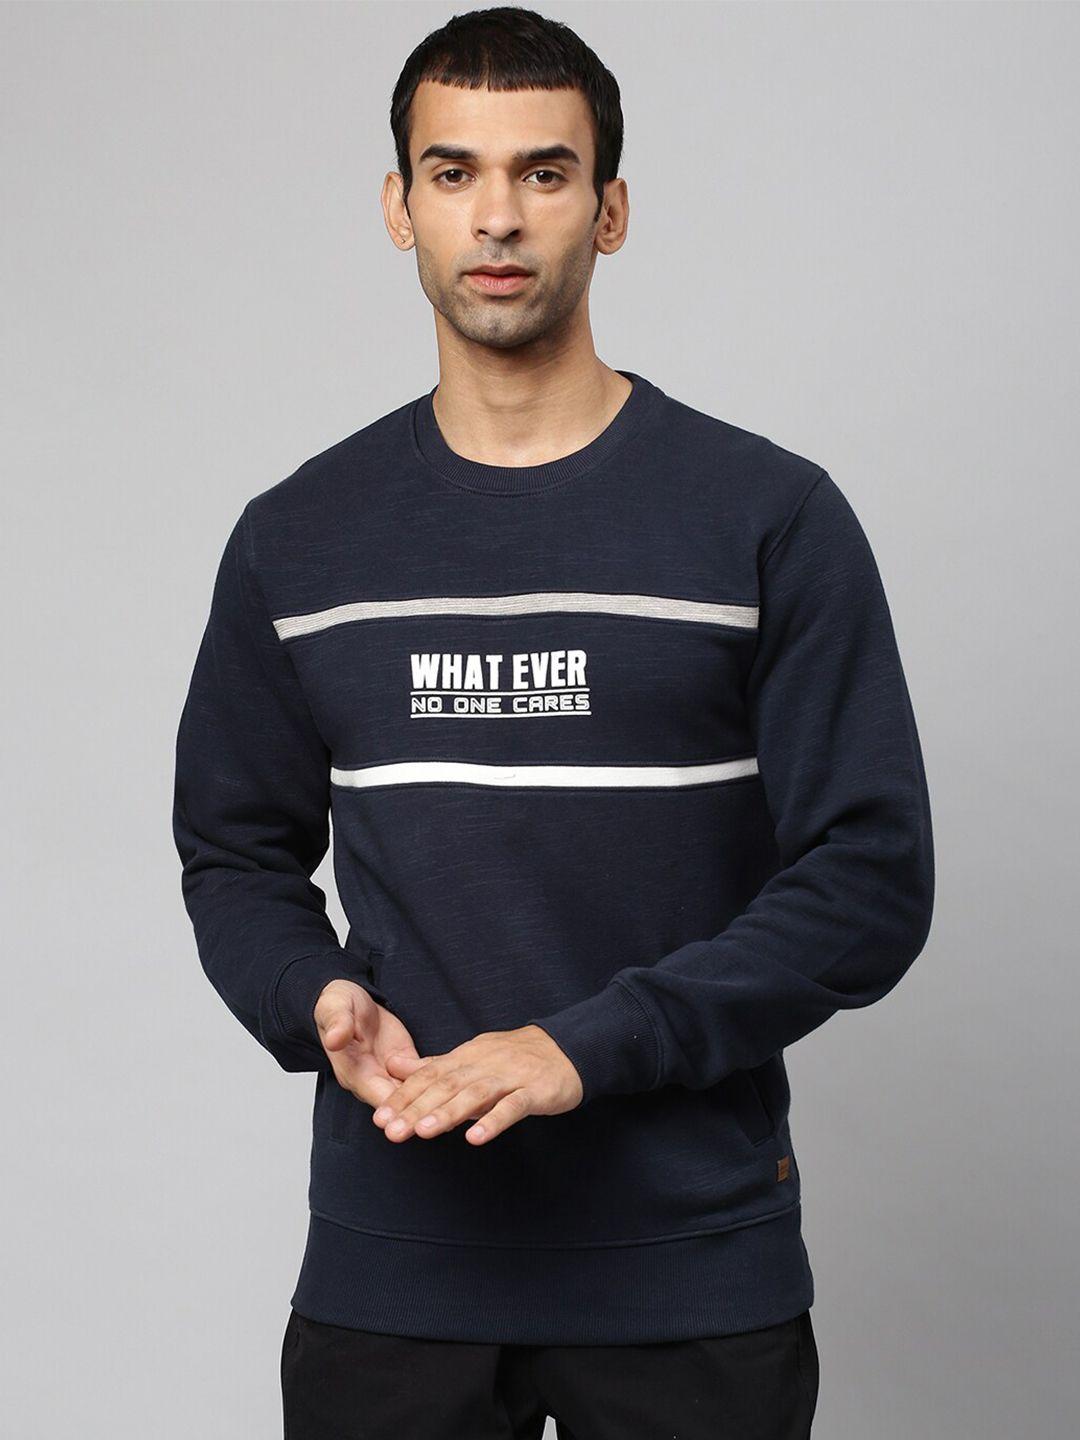 campus sutra men navy blue & white typography printed pullover